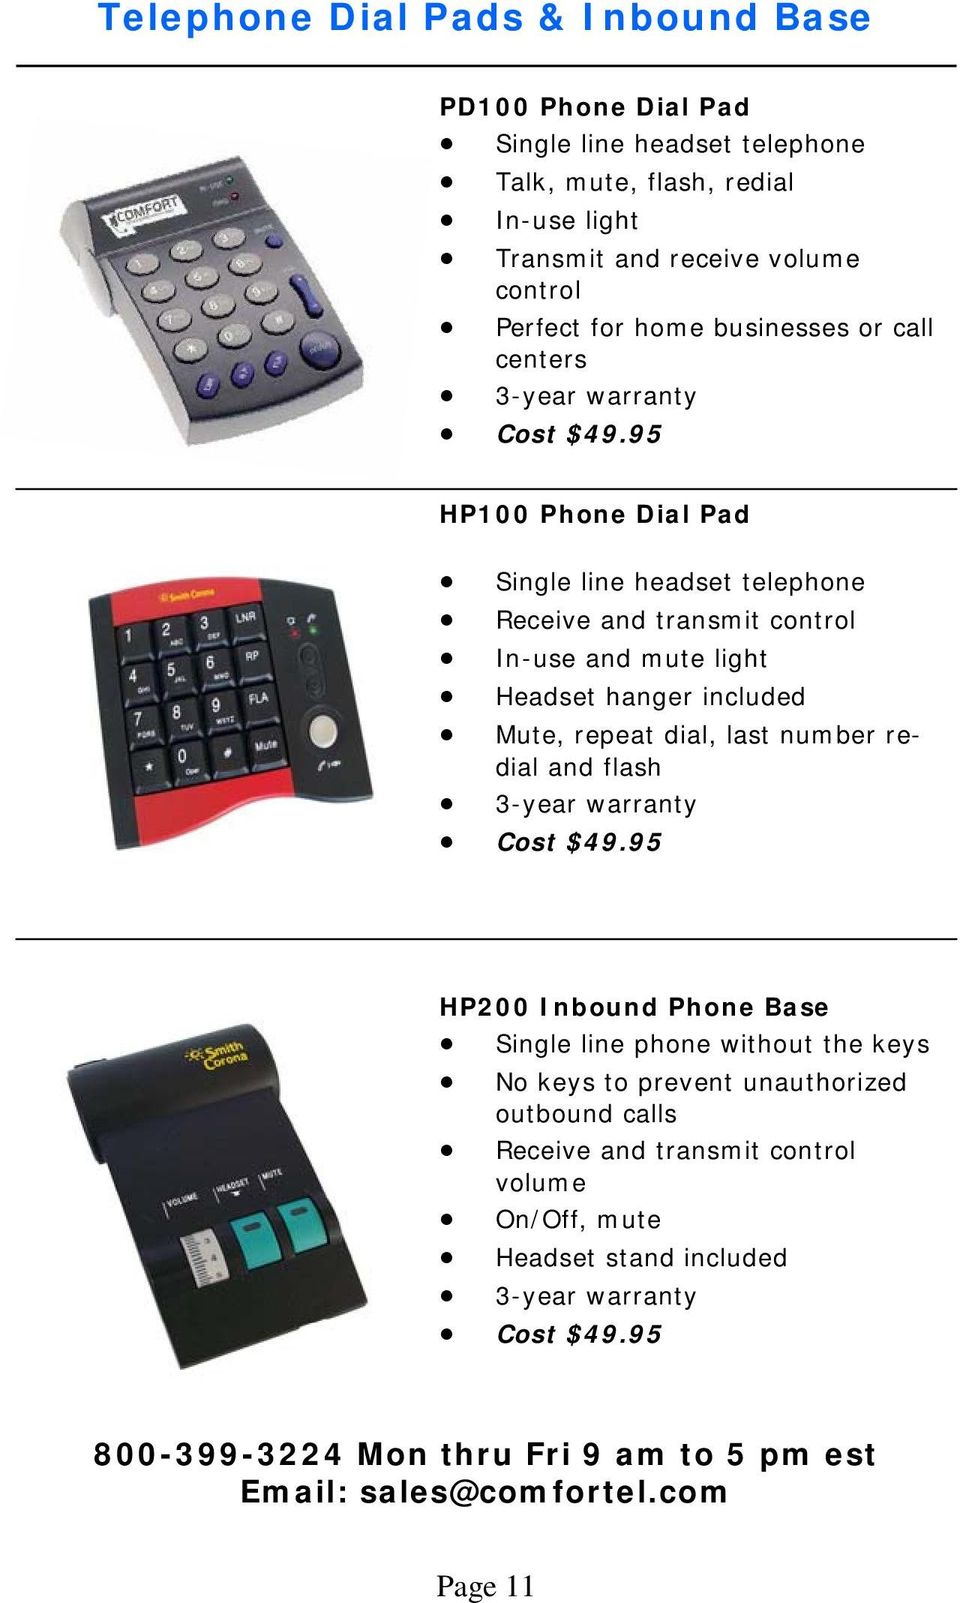 95 HP100 Phone Dial Pad Single line headset telephone Receive and transmit control In-use and mute light Headset hanger included Mute, repeat dial, last number redial